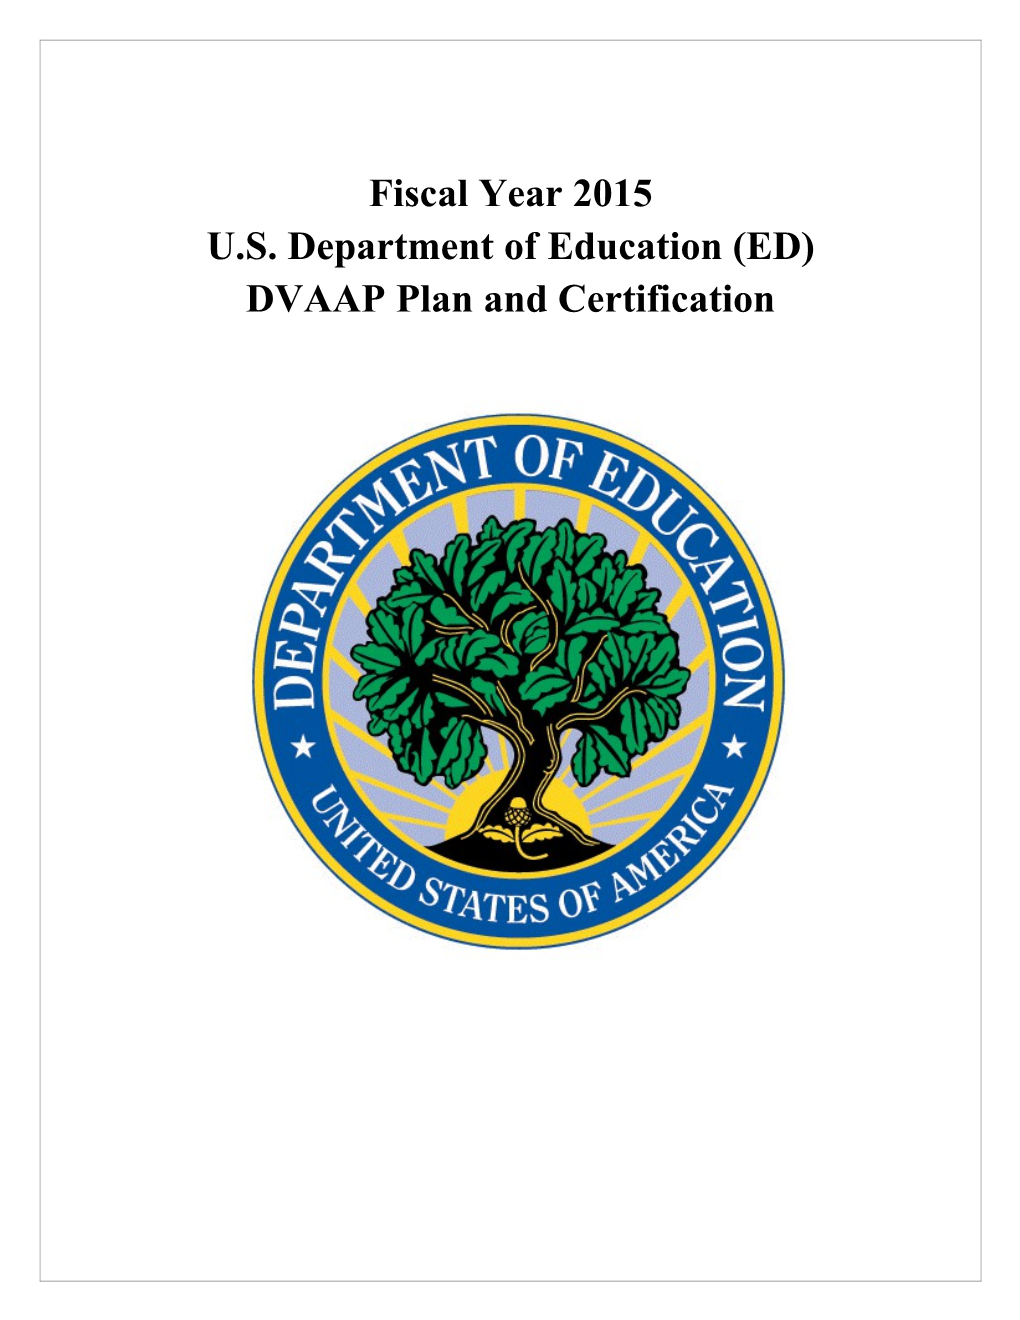 ED's Disabled Veterans Affirmative Action Program (DVAAP) Annual Report, Fiscal Years 2013-2015